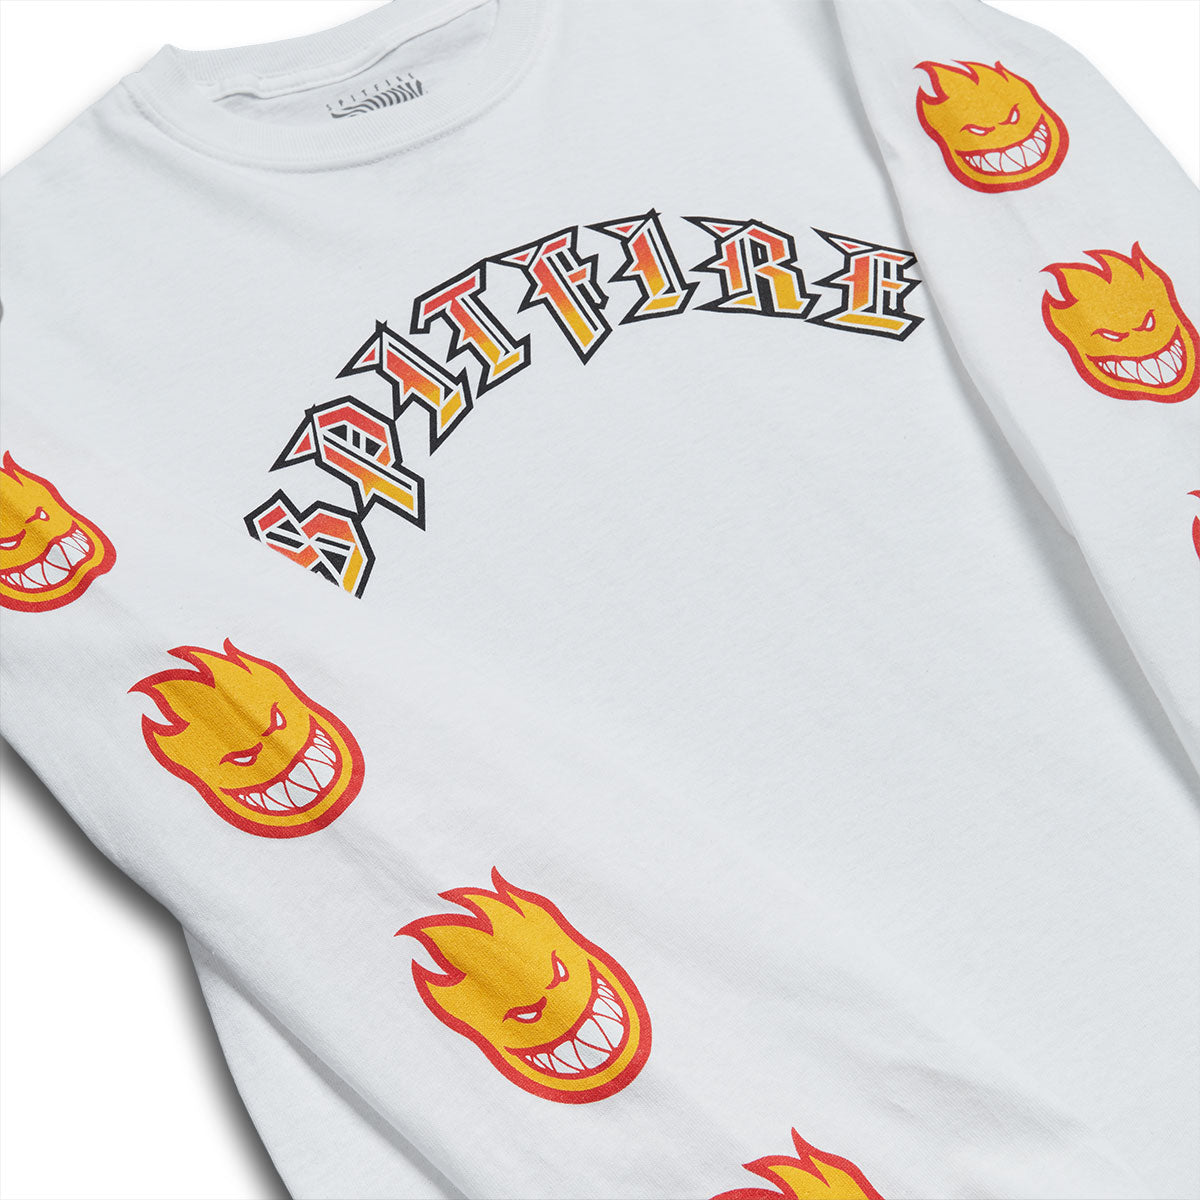 Spitfire Old E Bighead Fill Sleeve Long Sleeve T-Shirt - White/Gold/Red image 2